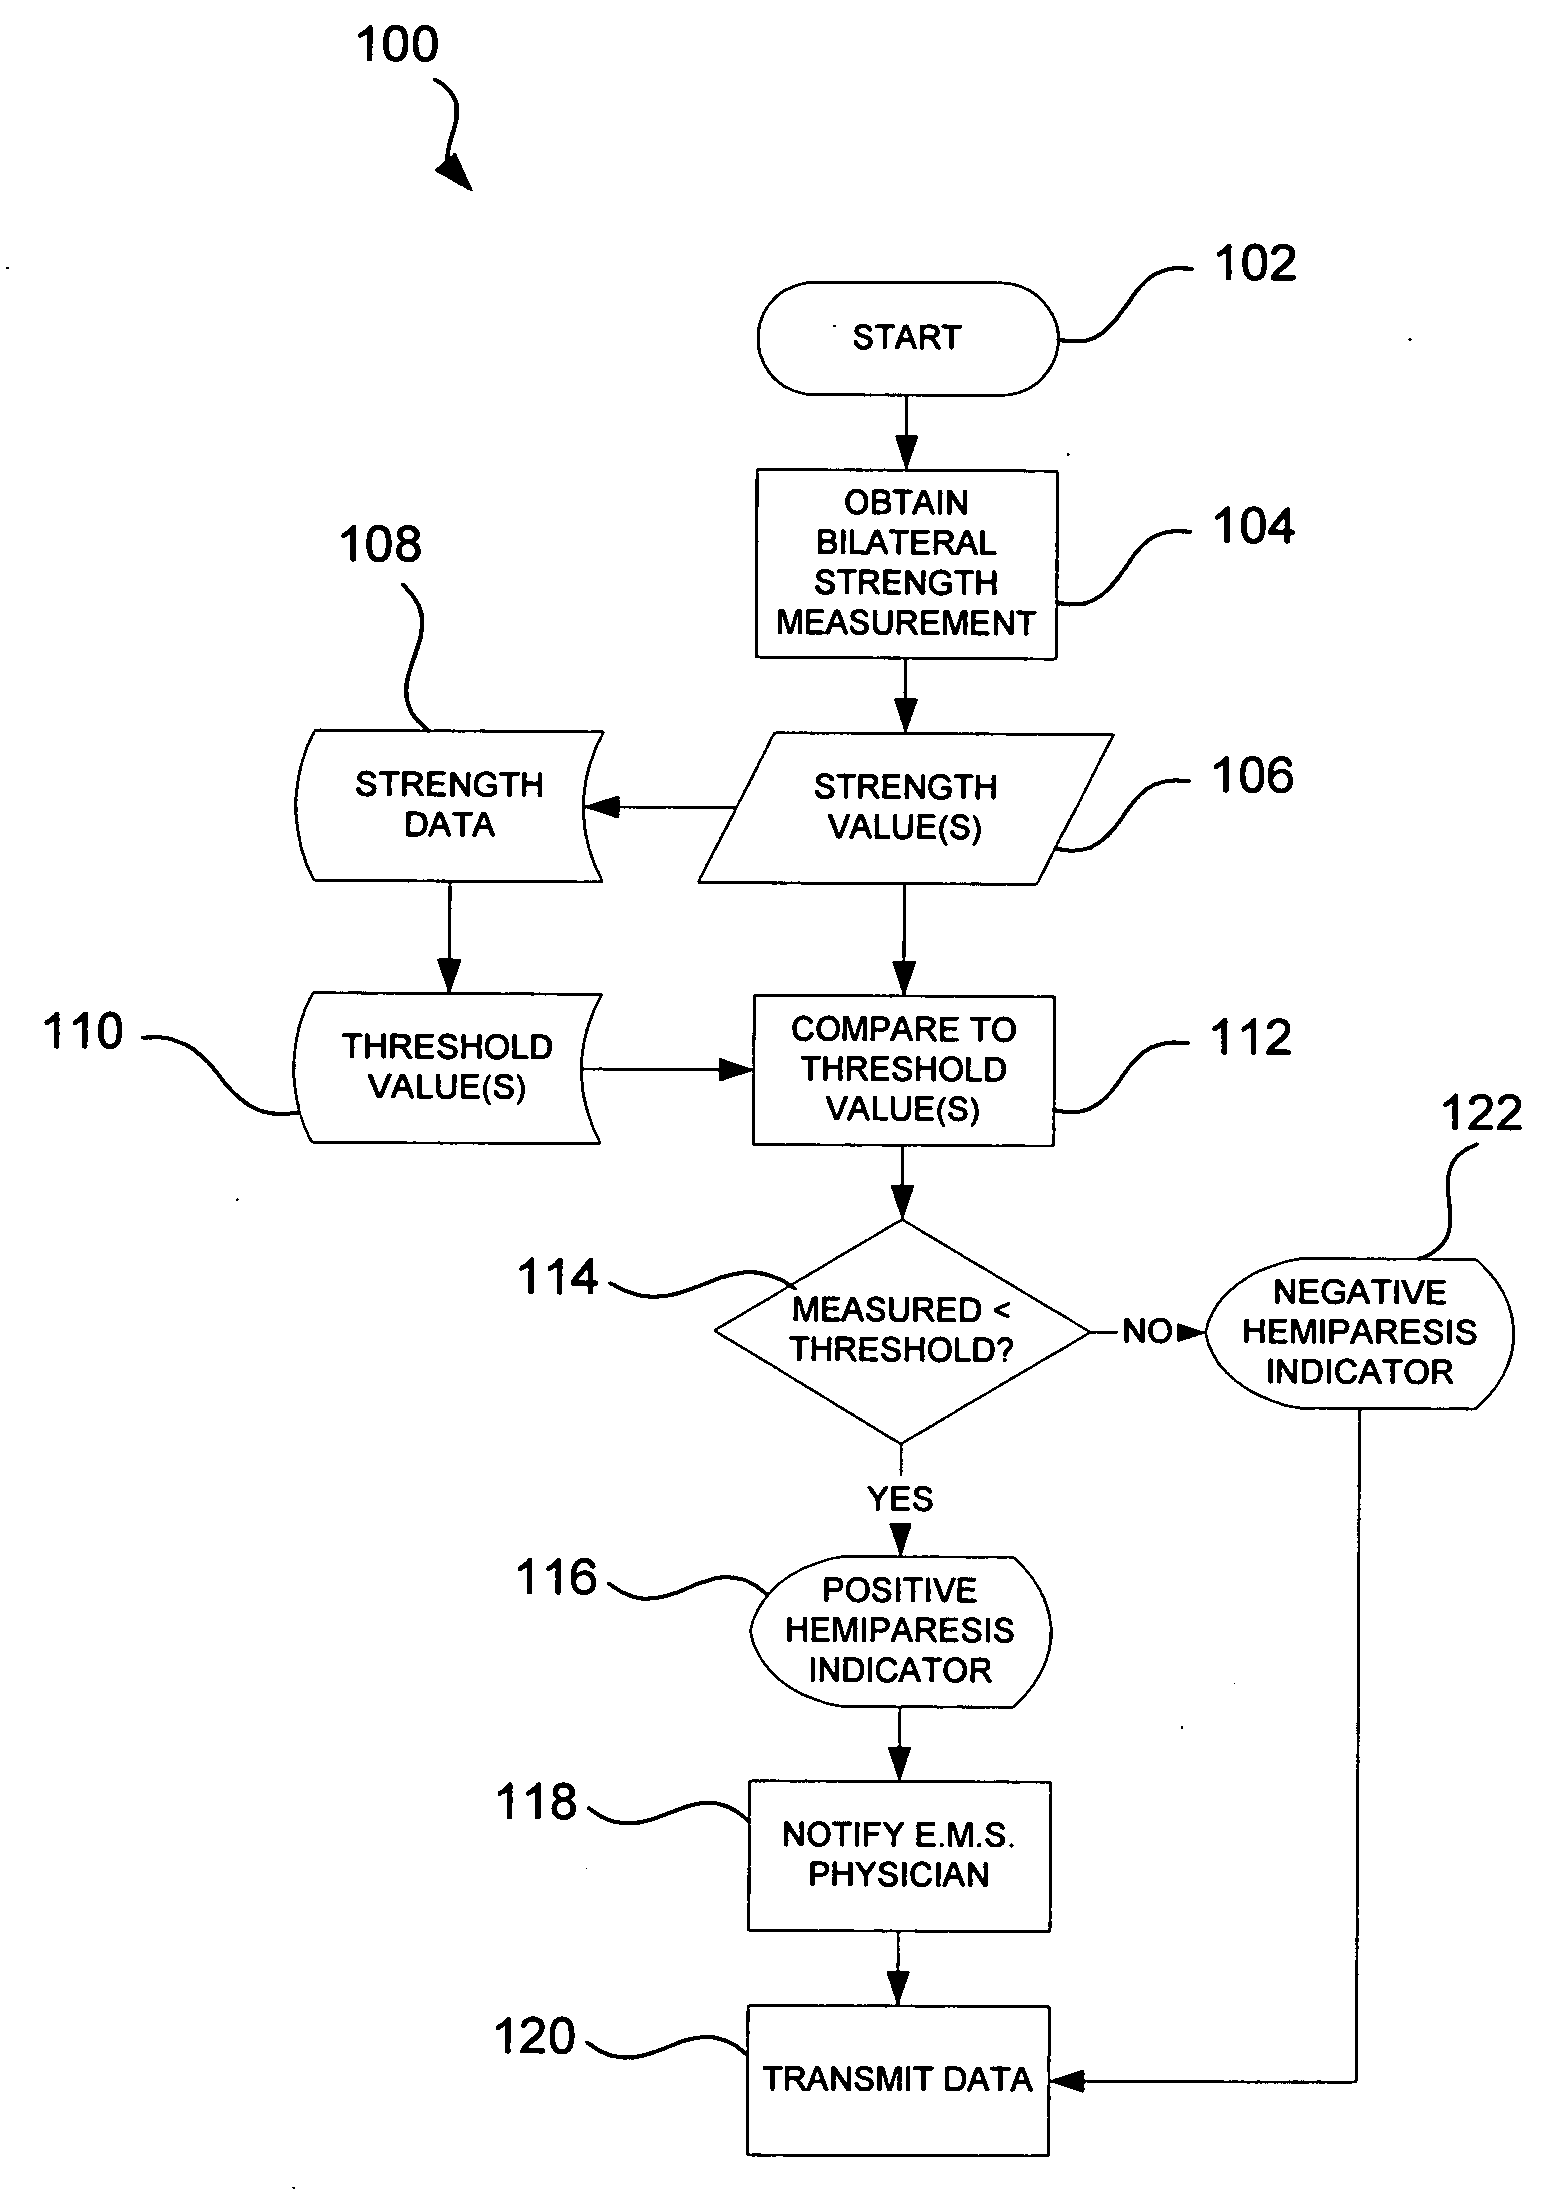 Stroke symptom recognition devices and methods